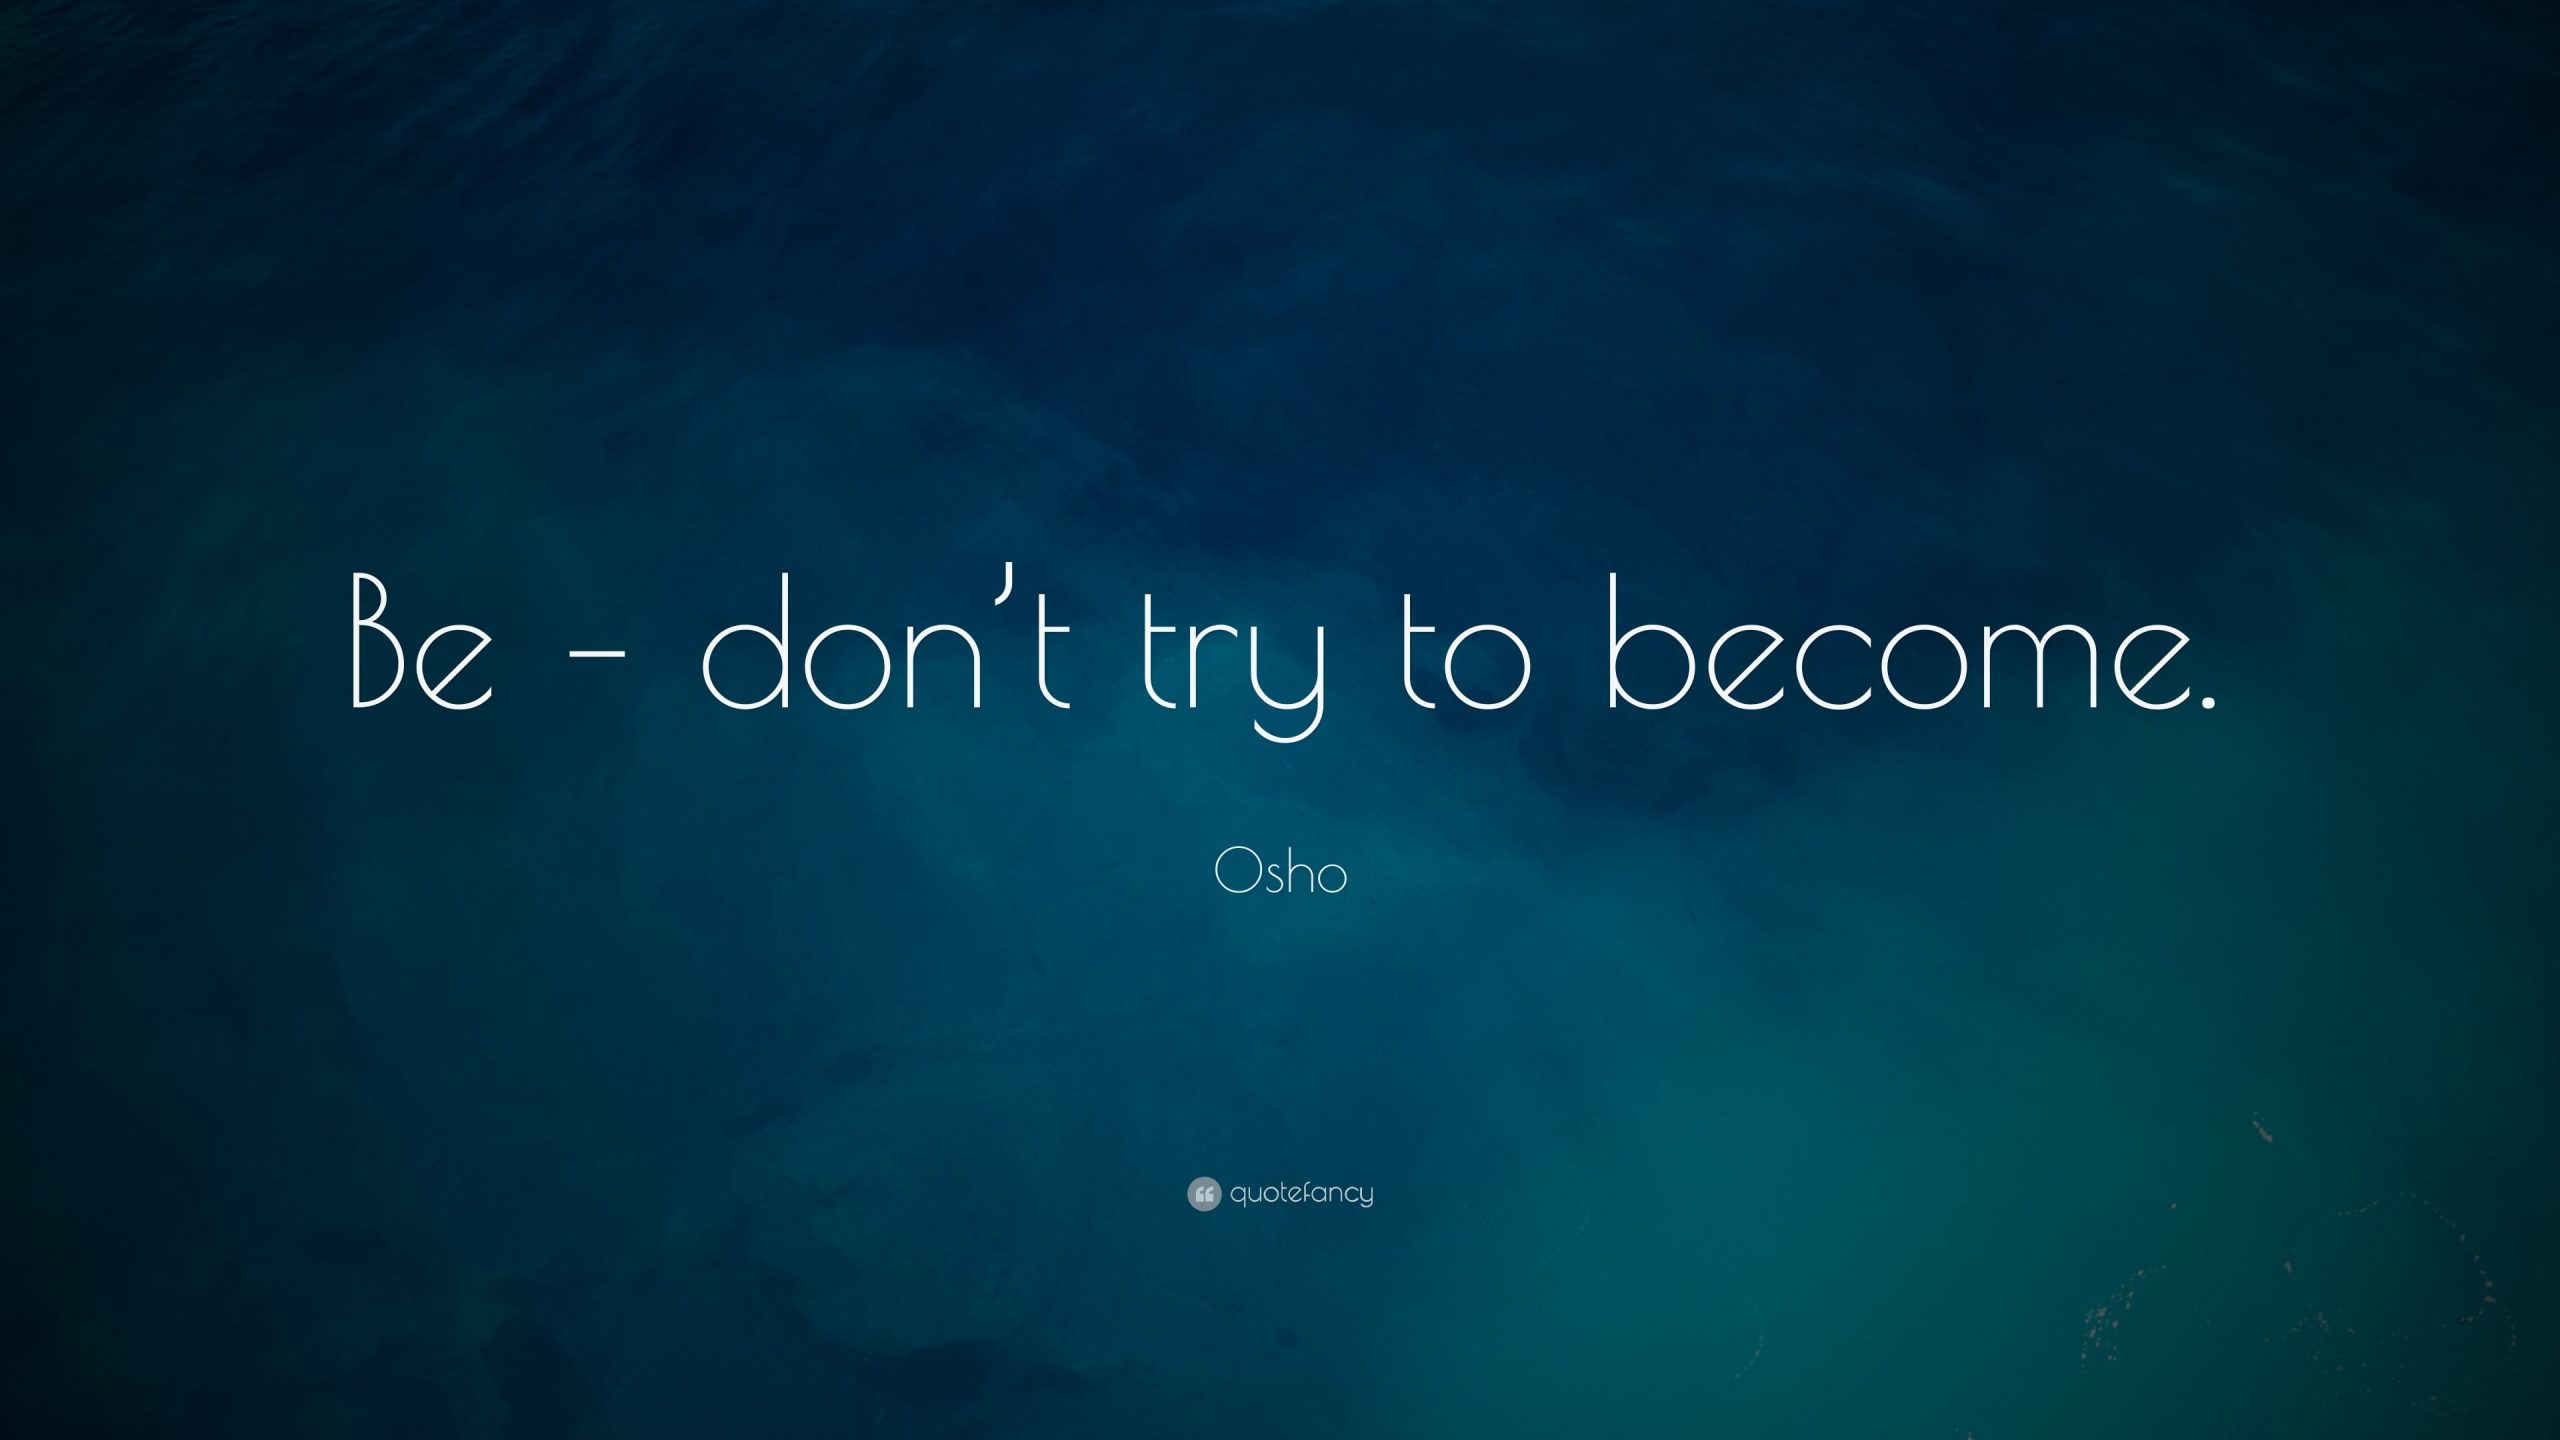 Wallpaper black background with text overlay, quote, motivational, Osho